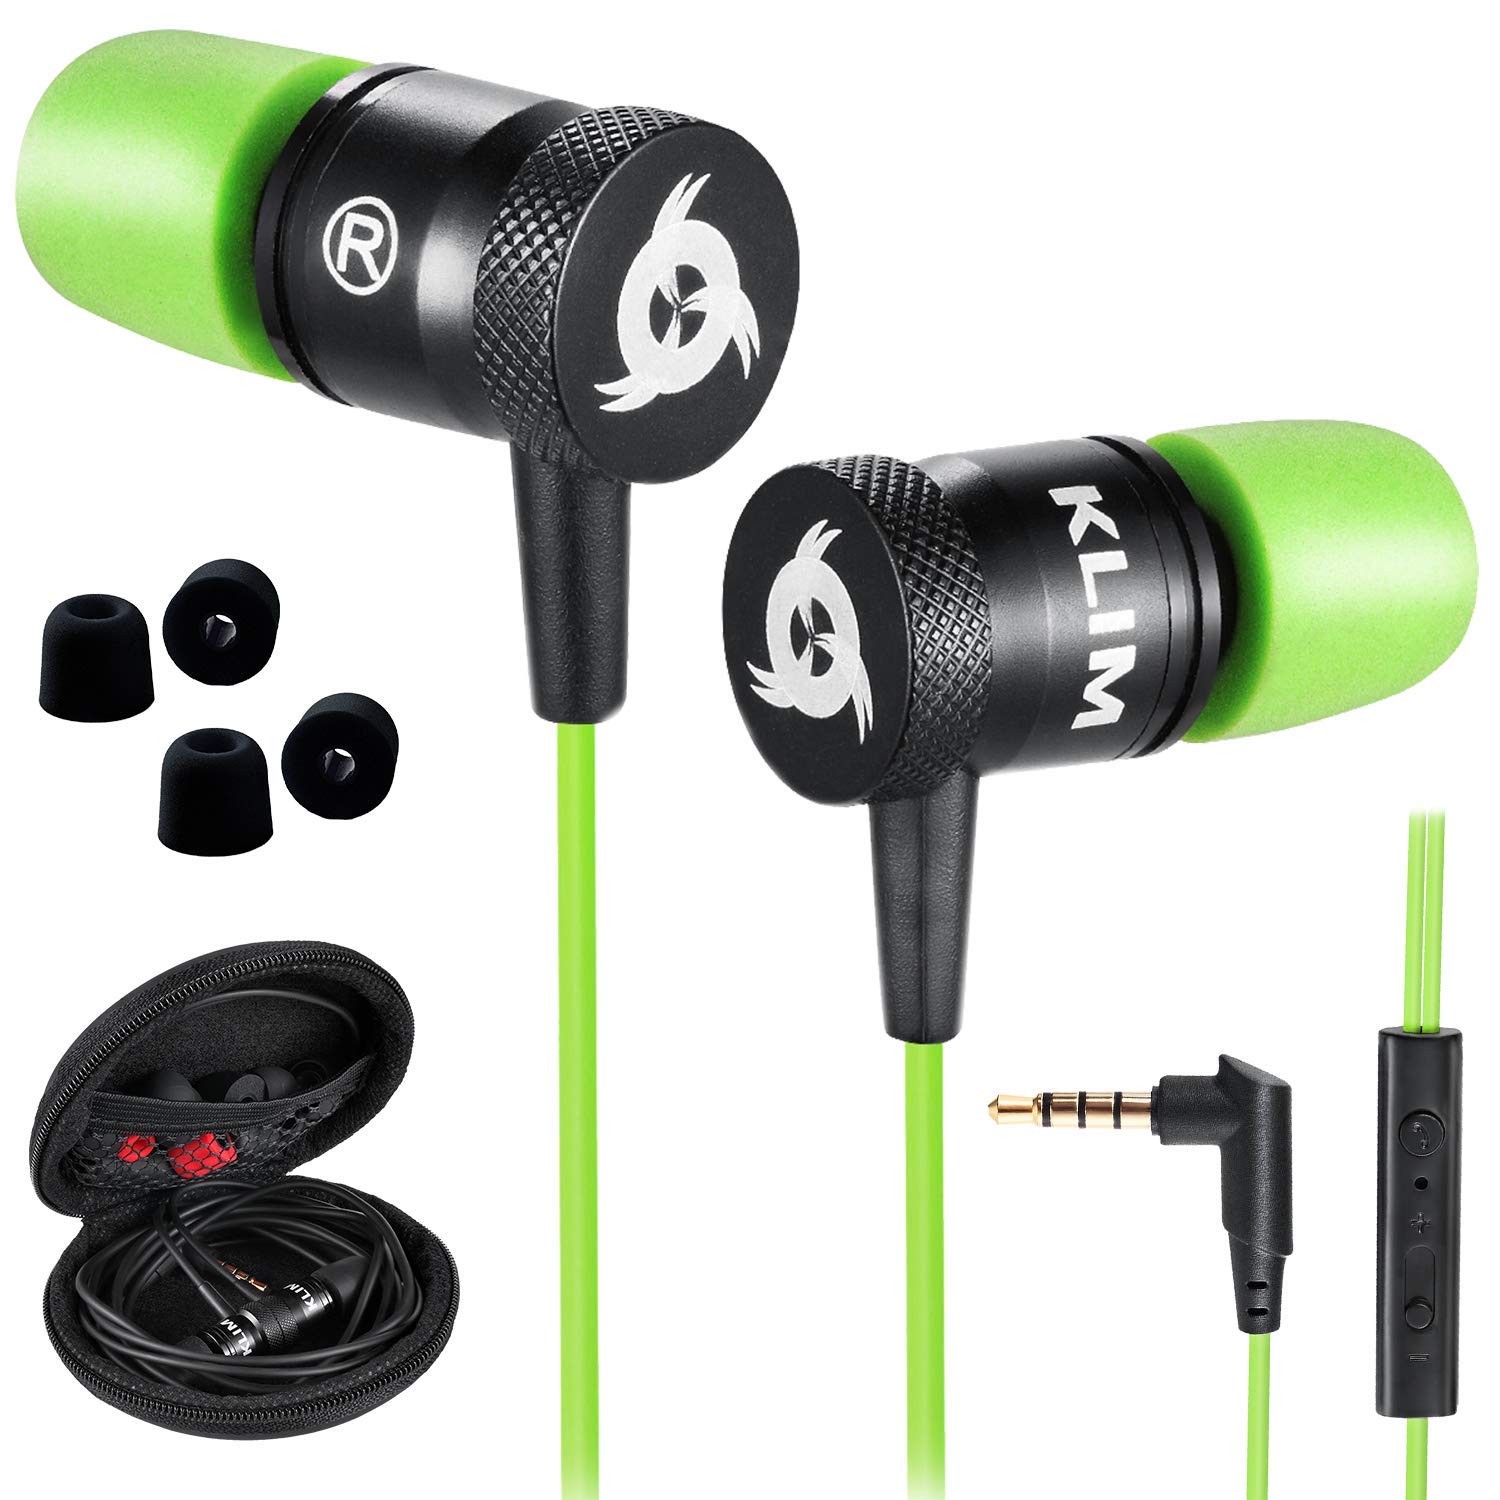 Green and black KLIM Fusion earbuds